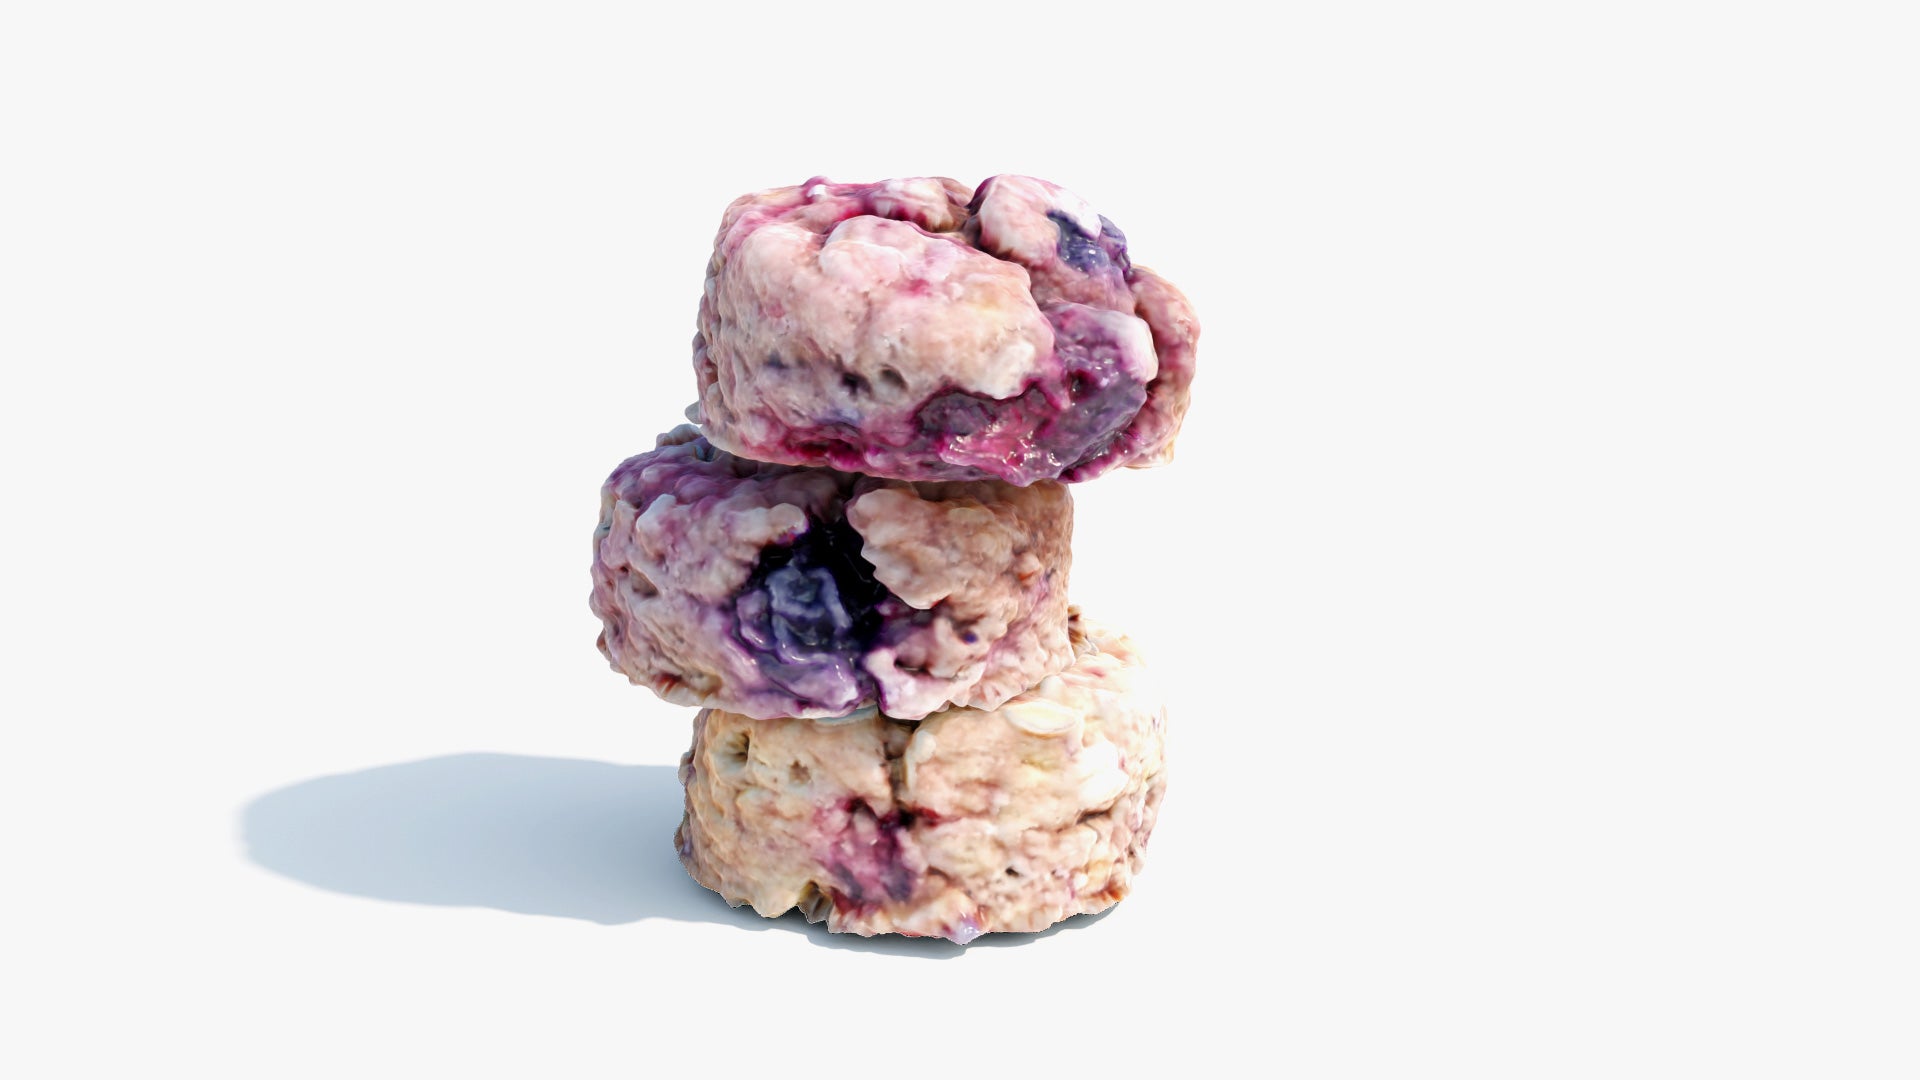 Berry scones 3d model Blender and OBJ with PBR textures. Real-time and low-poly